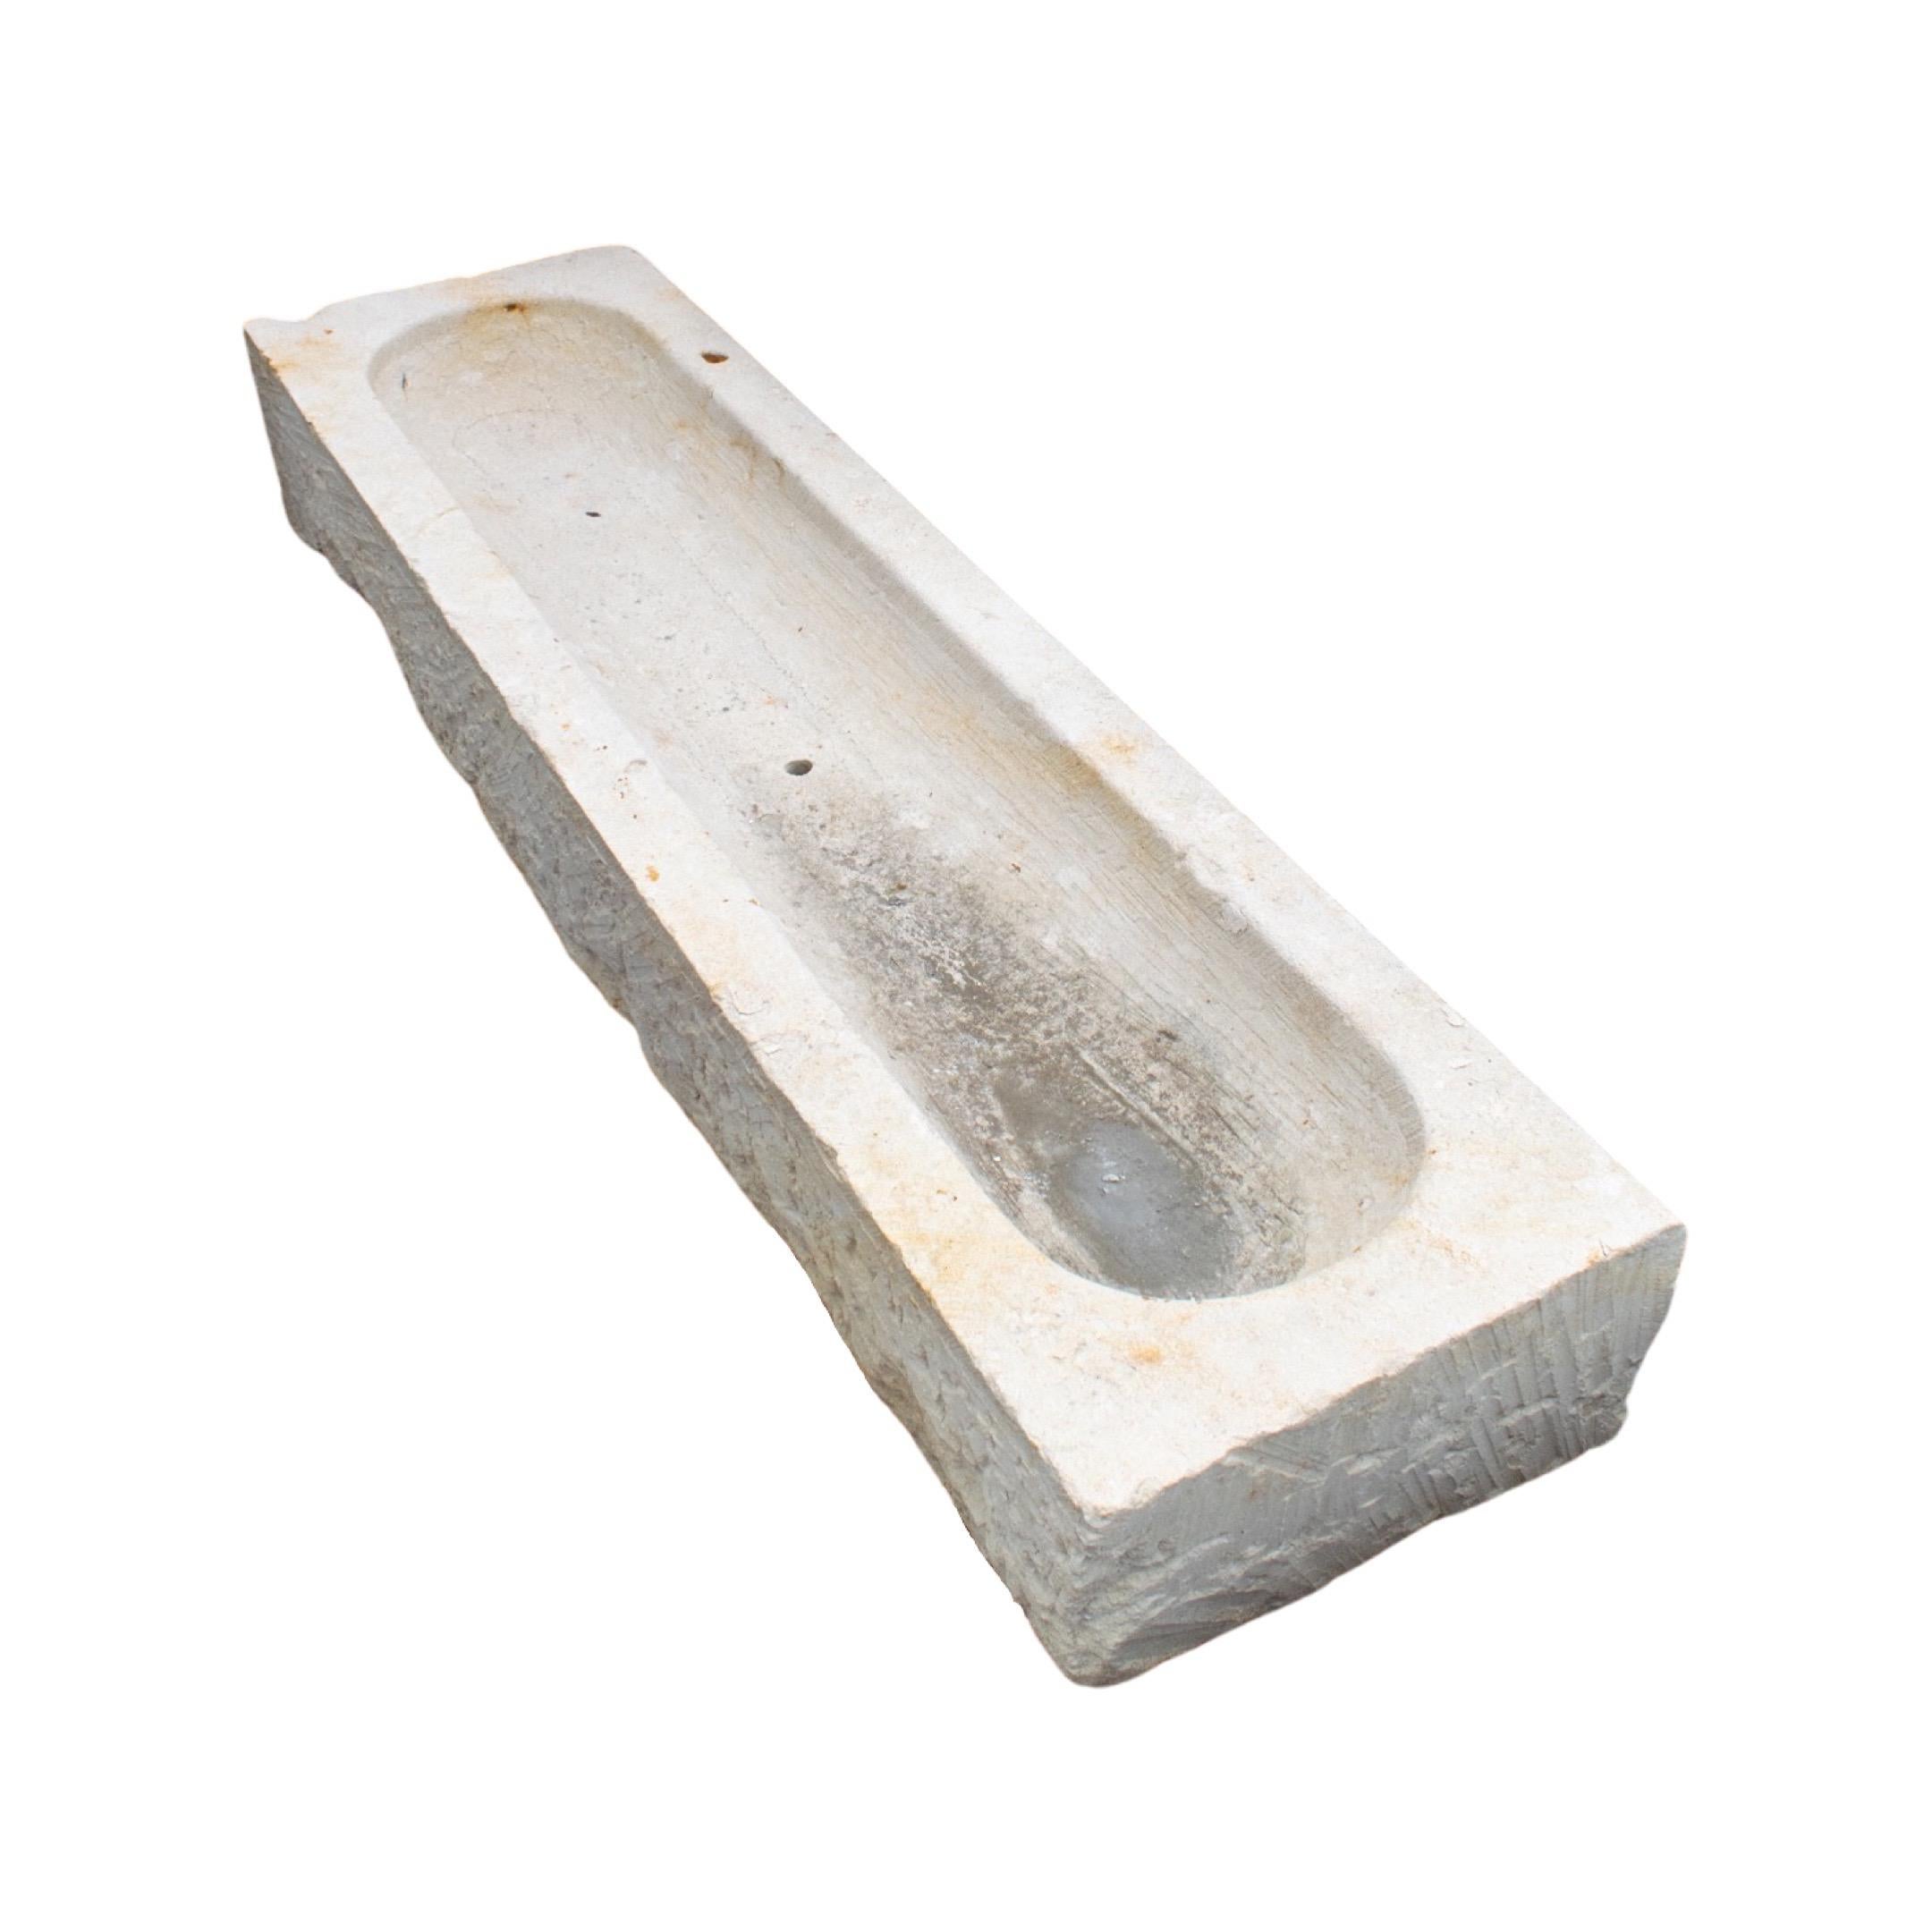 Large narrow style trough. Made out of limestone. Originates from France. Circa, 18th c.